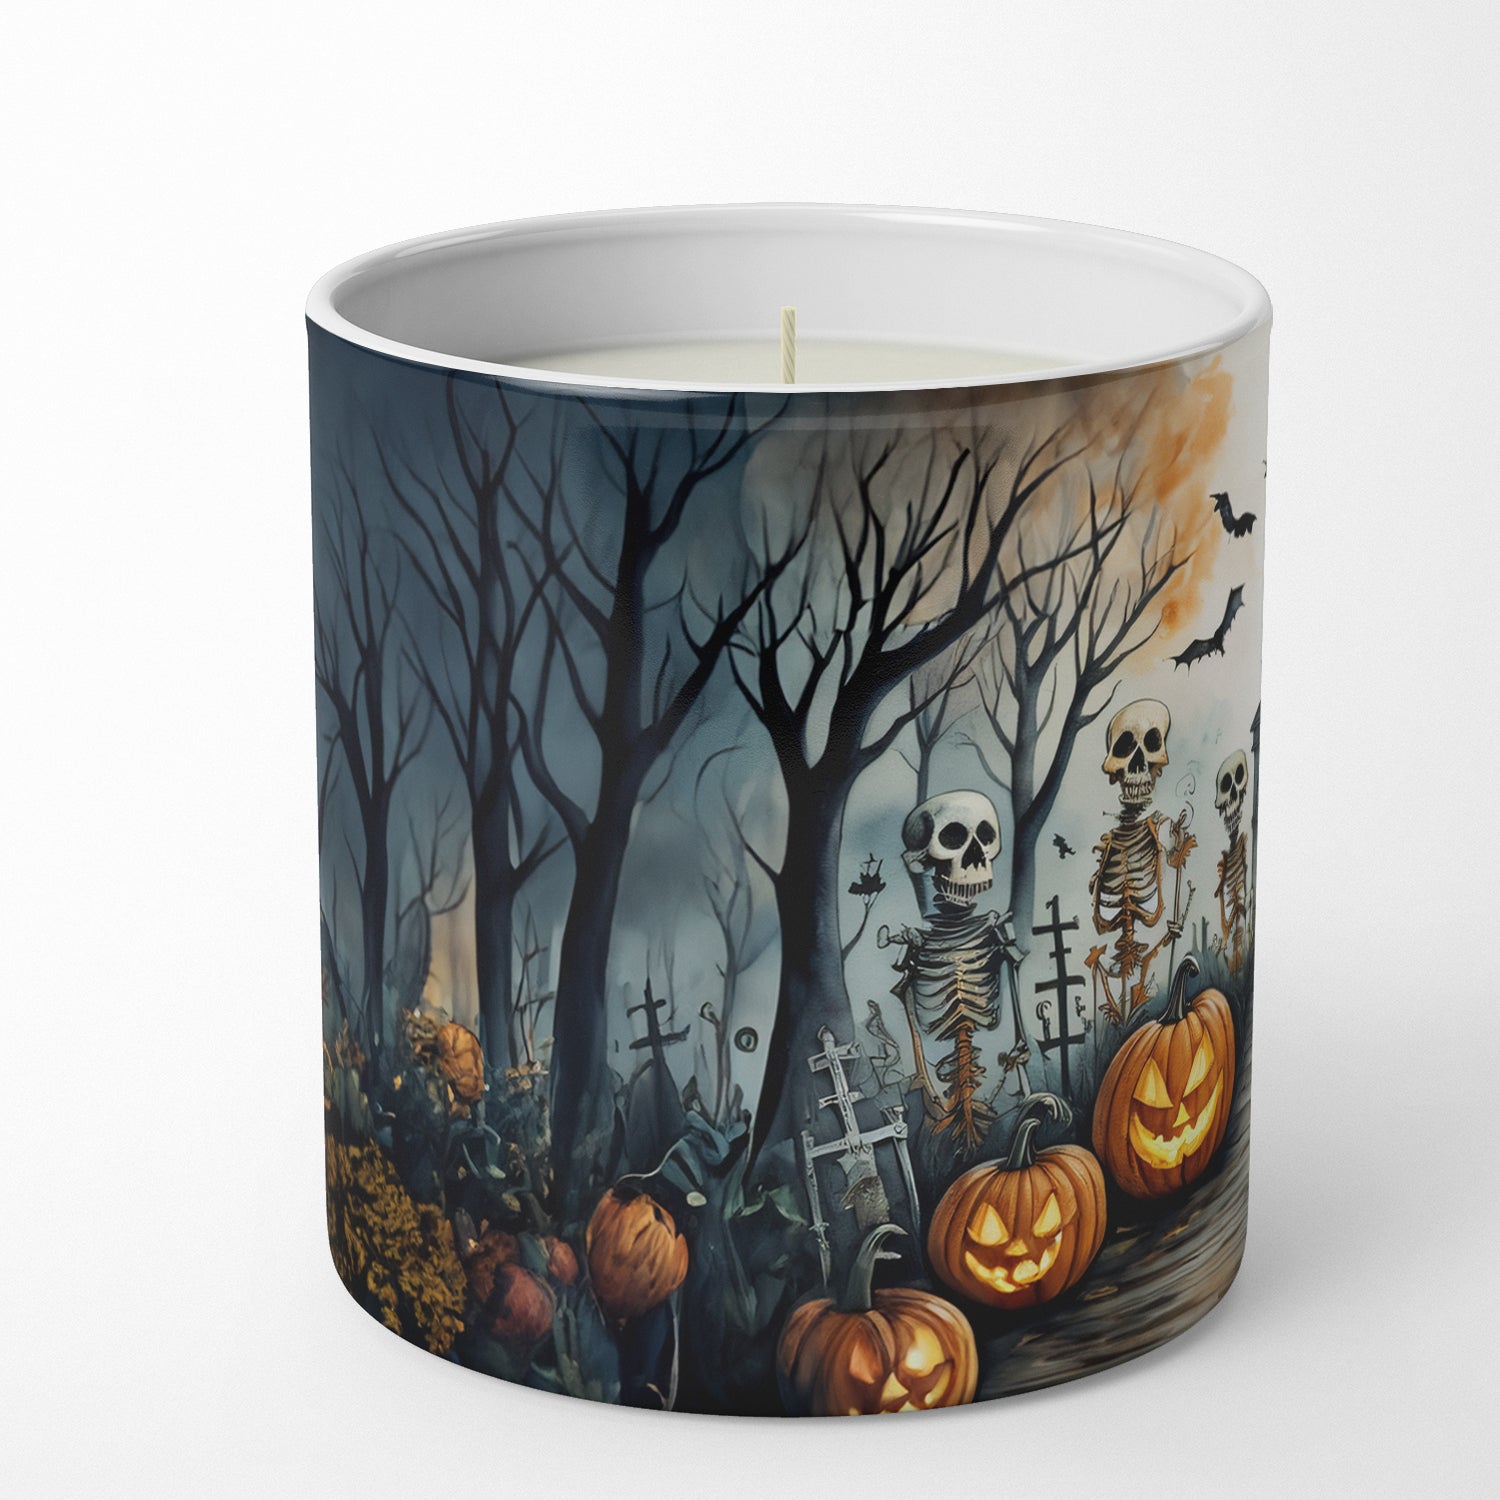 Skeleton Spooky Halloween Decorative Soy Candle